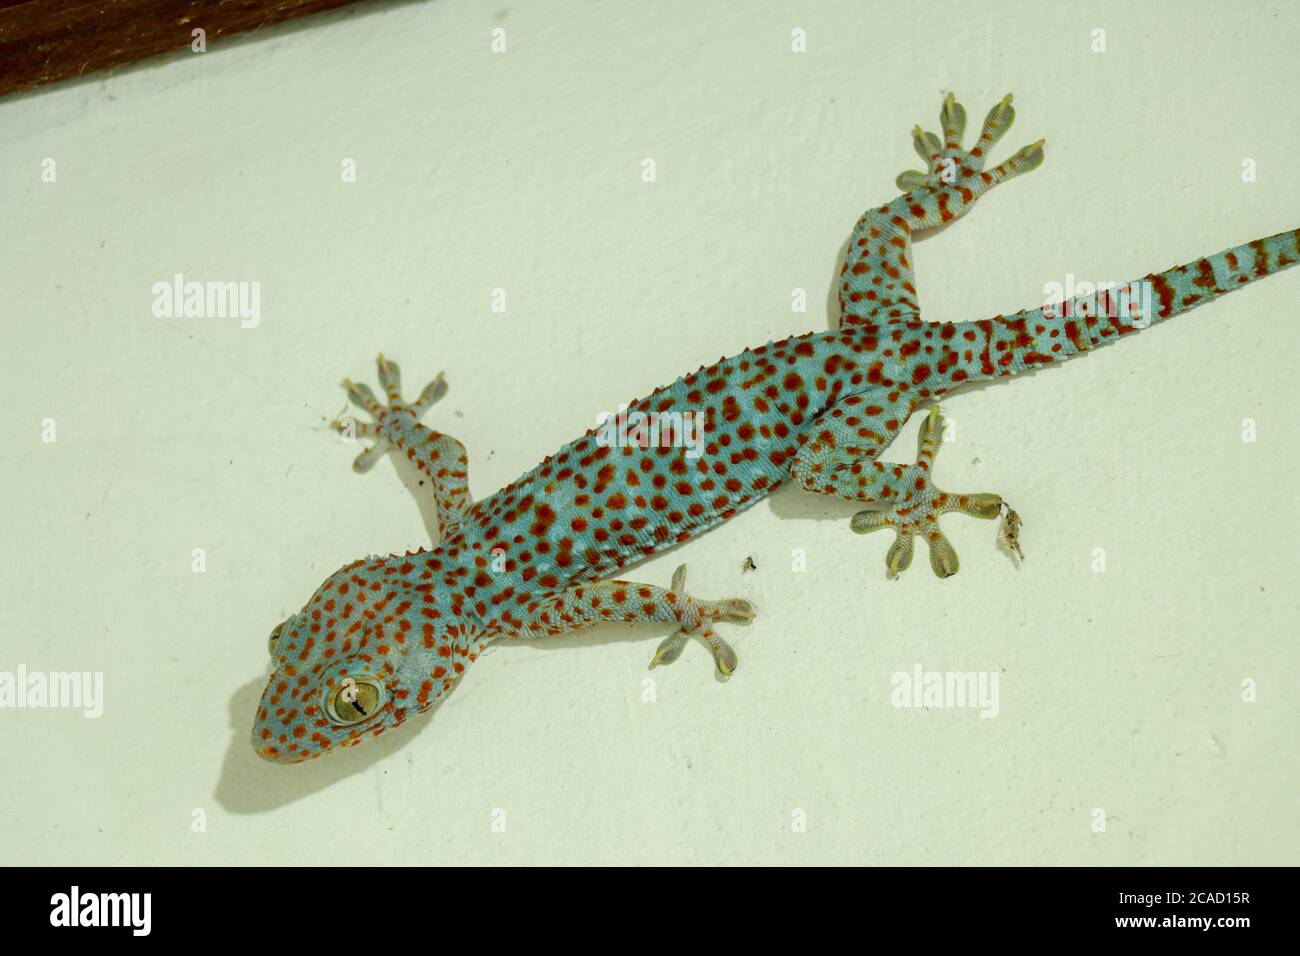 Soft selective focus tokay gecko, tucktoo on a concrete wall, grainy texture background. Large adult Gekko gecko with orange spots Stock Photo